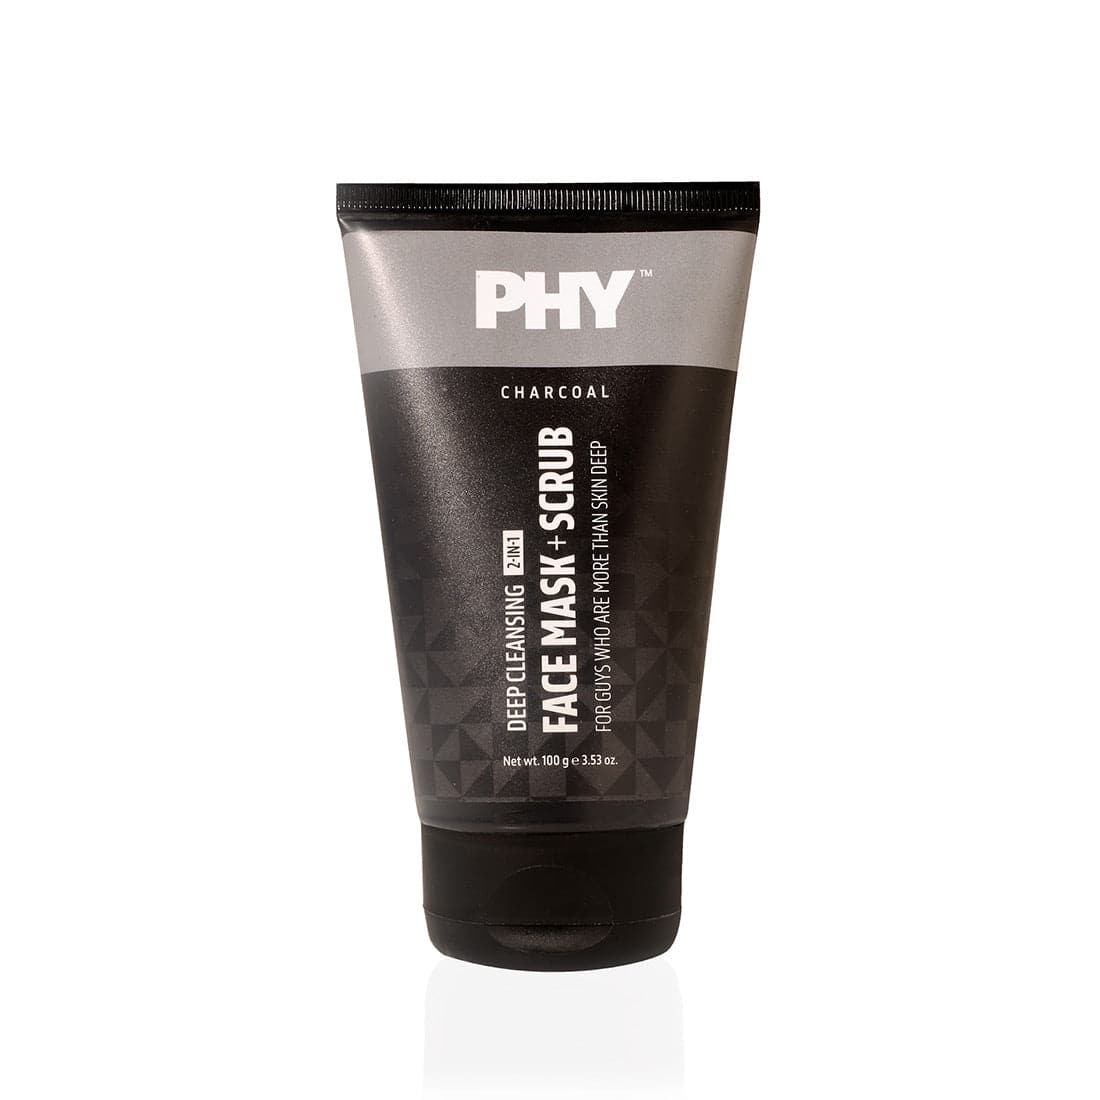 Phy Charcoal 2-In-1 Face Mask + Scrub | Deep Cleansing | For Oily Or Combi Skin